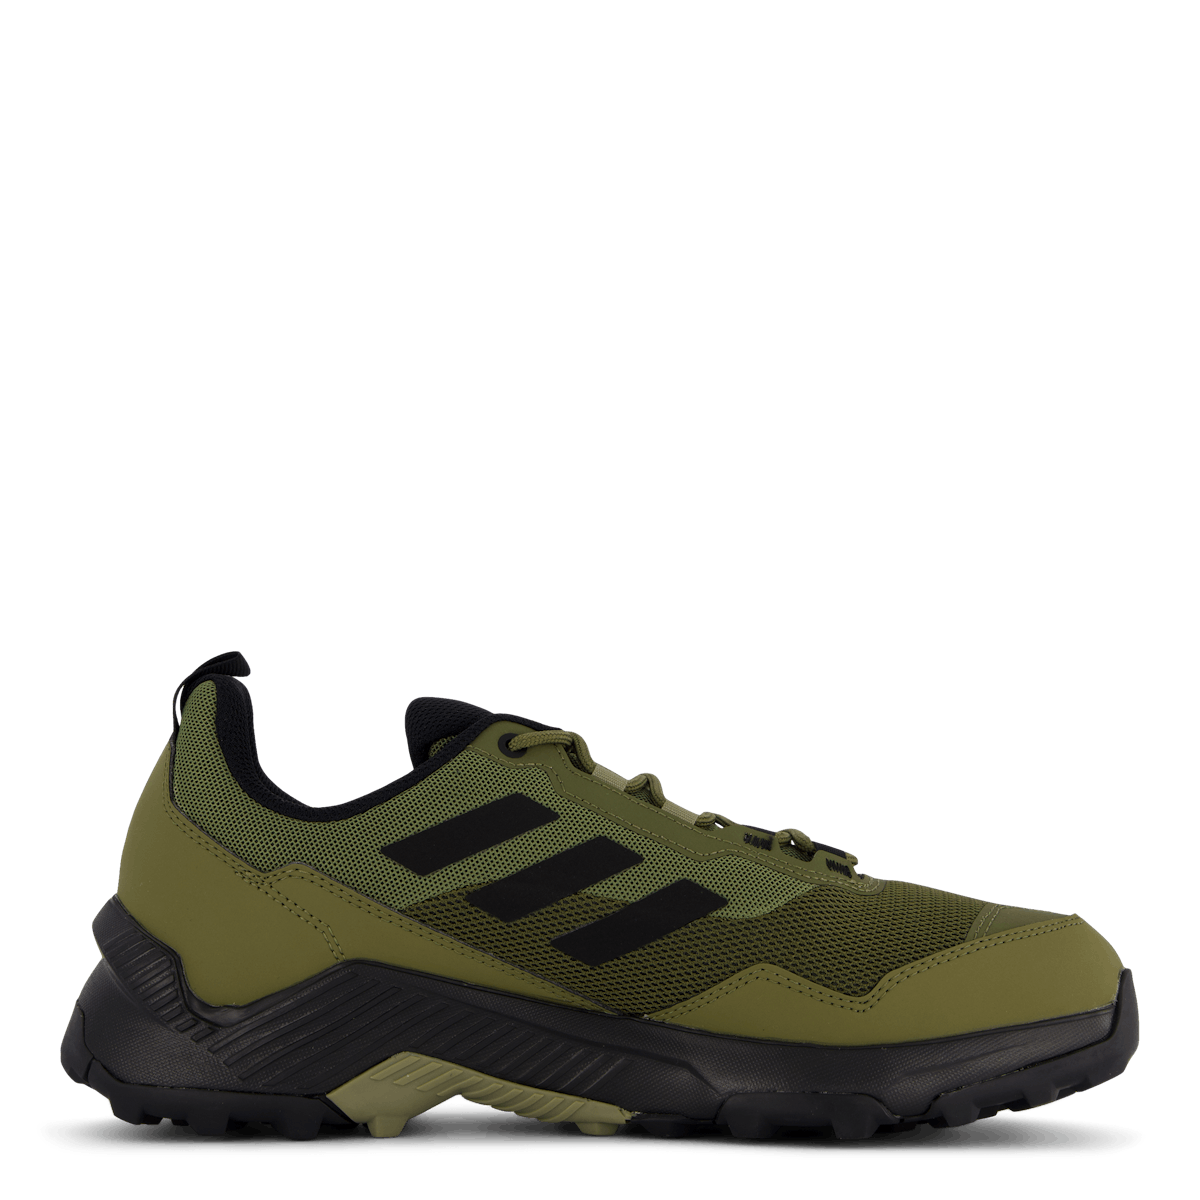 Eastrail 2.0 Hiking Shoes Focus Olive / Core Black / Orbit Green